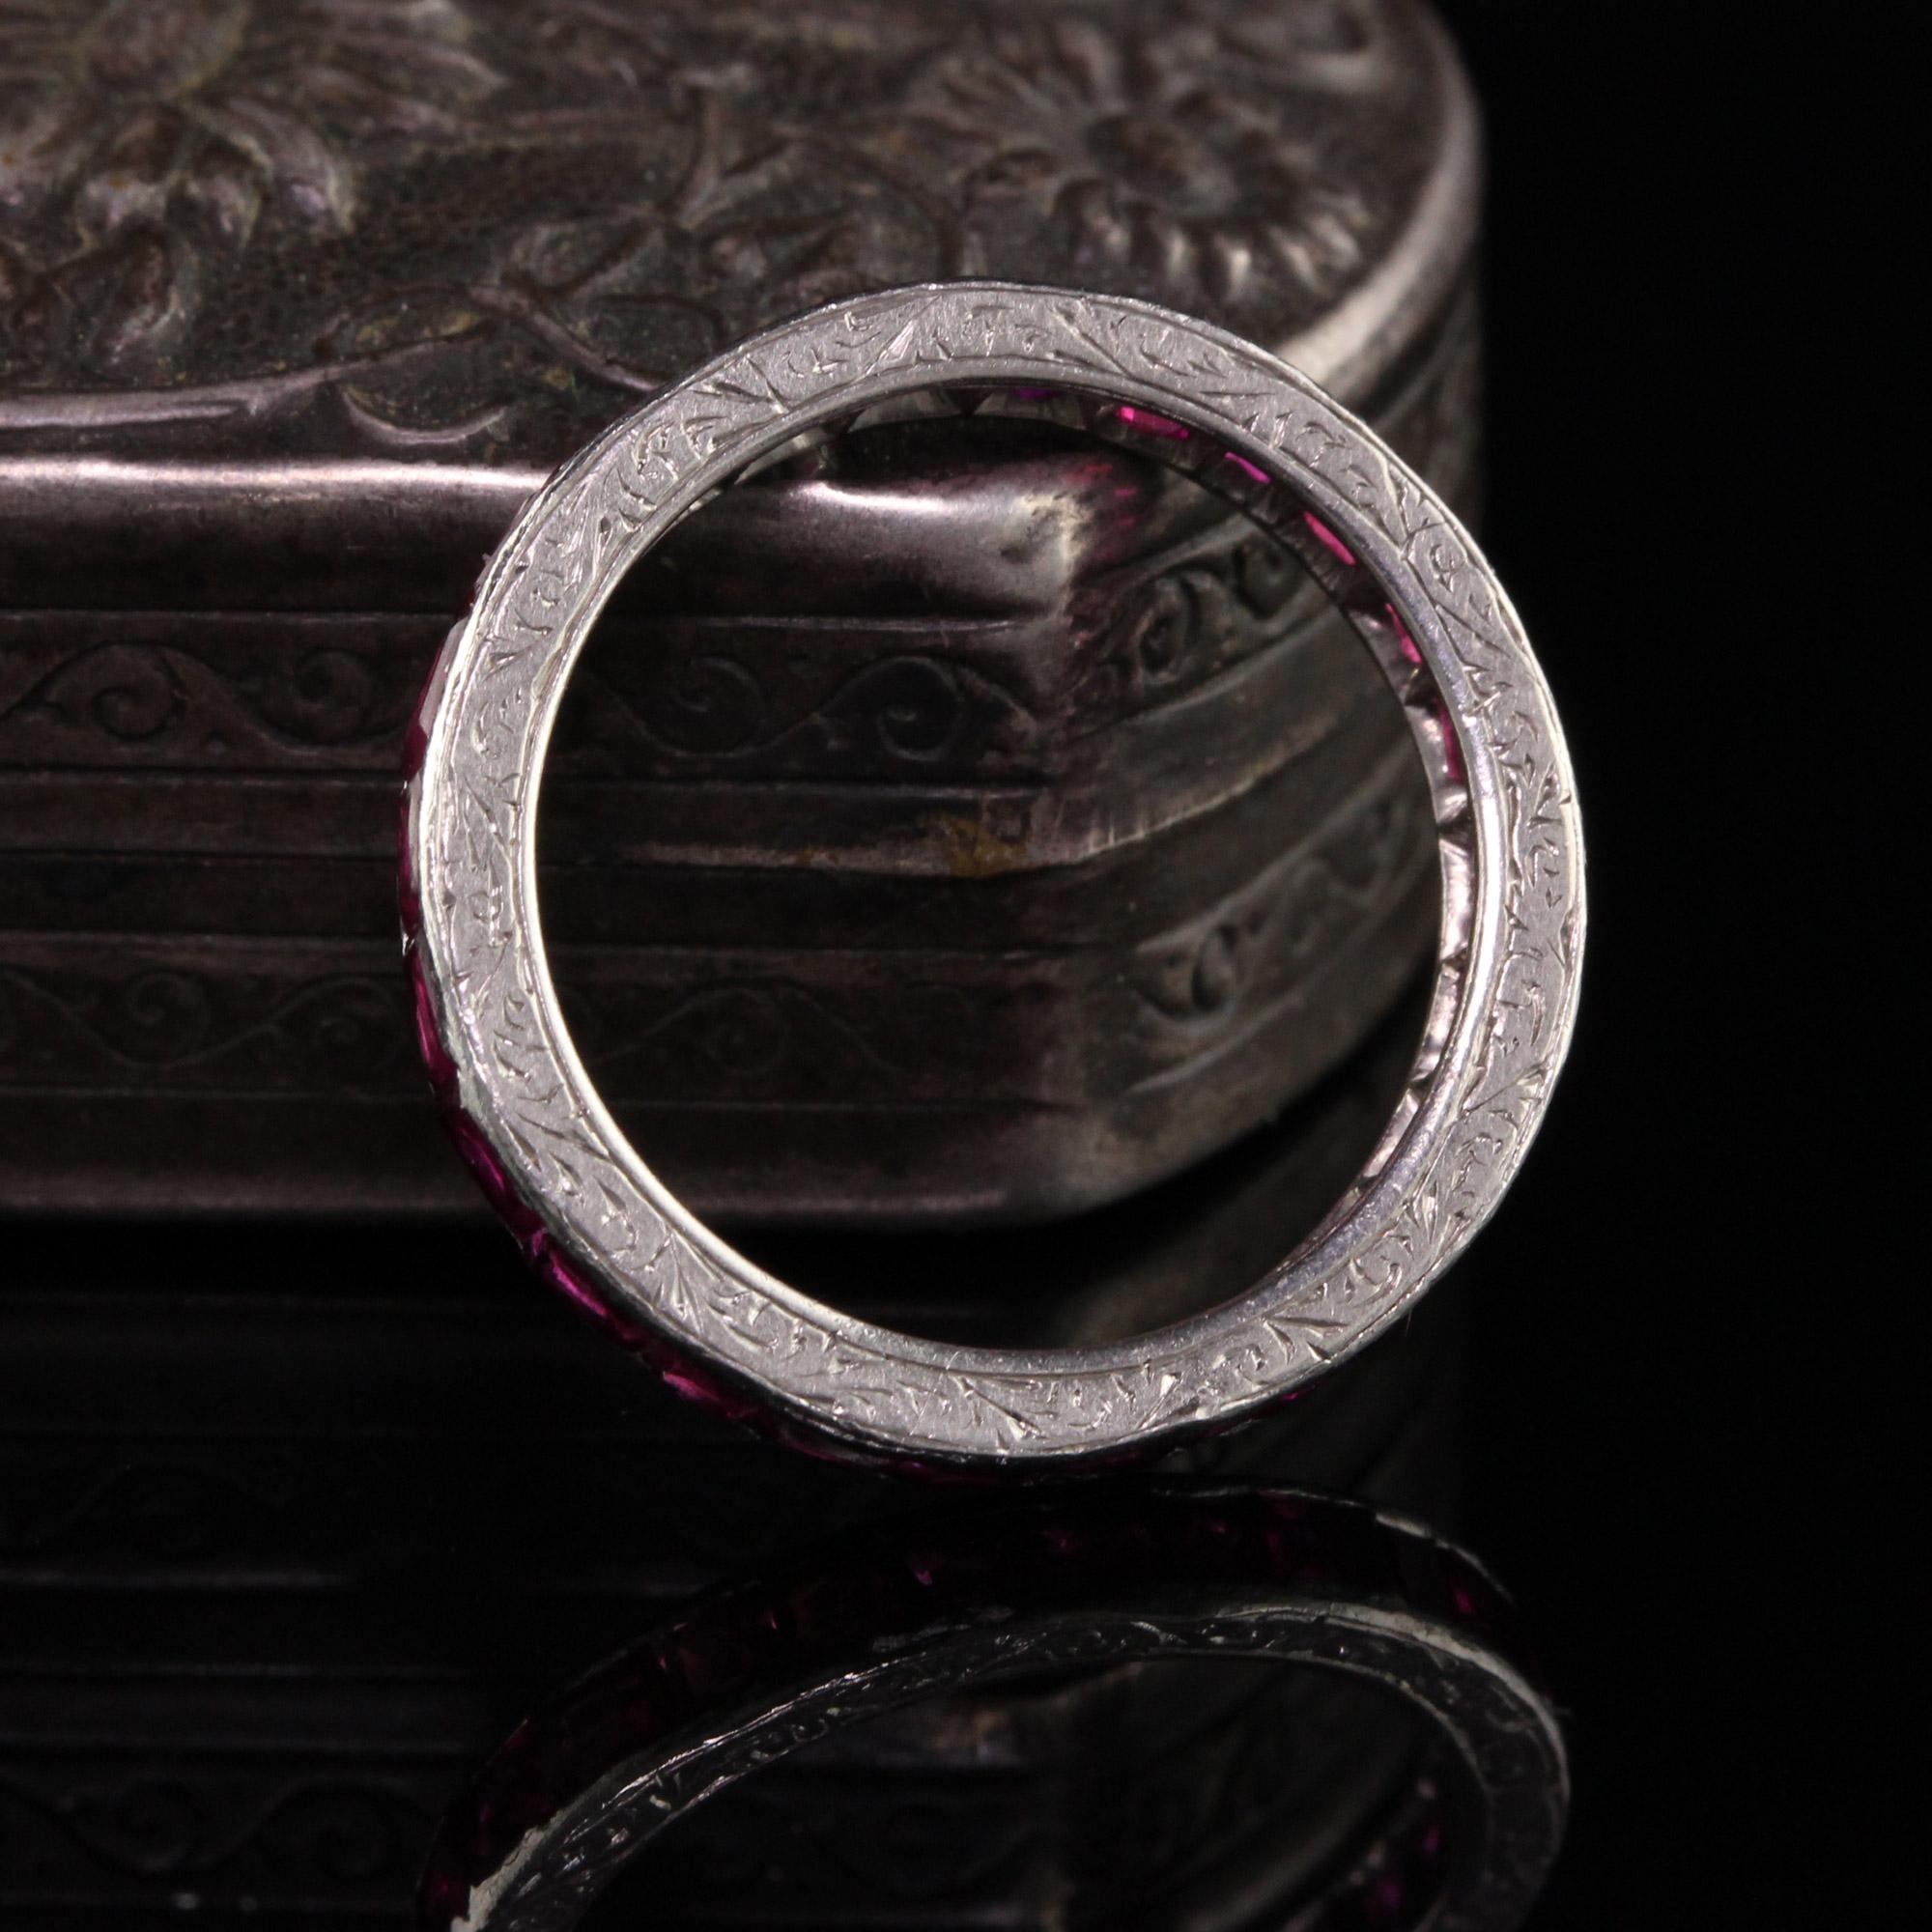 Beautiful Antique Art Deco Platinum Engraved Ruby Eternity Band - Size 6 1/2. This is a beautifully engraved platinum band that features nice red rubies going around the entire band. Some of the rubies have minor abrasions and chips but nothing that